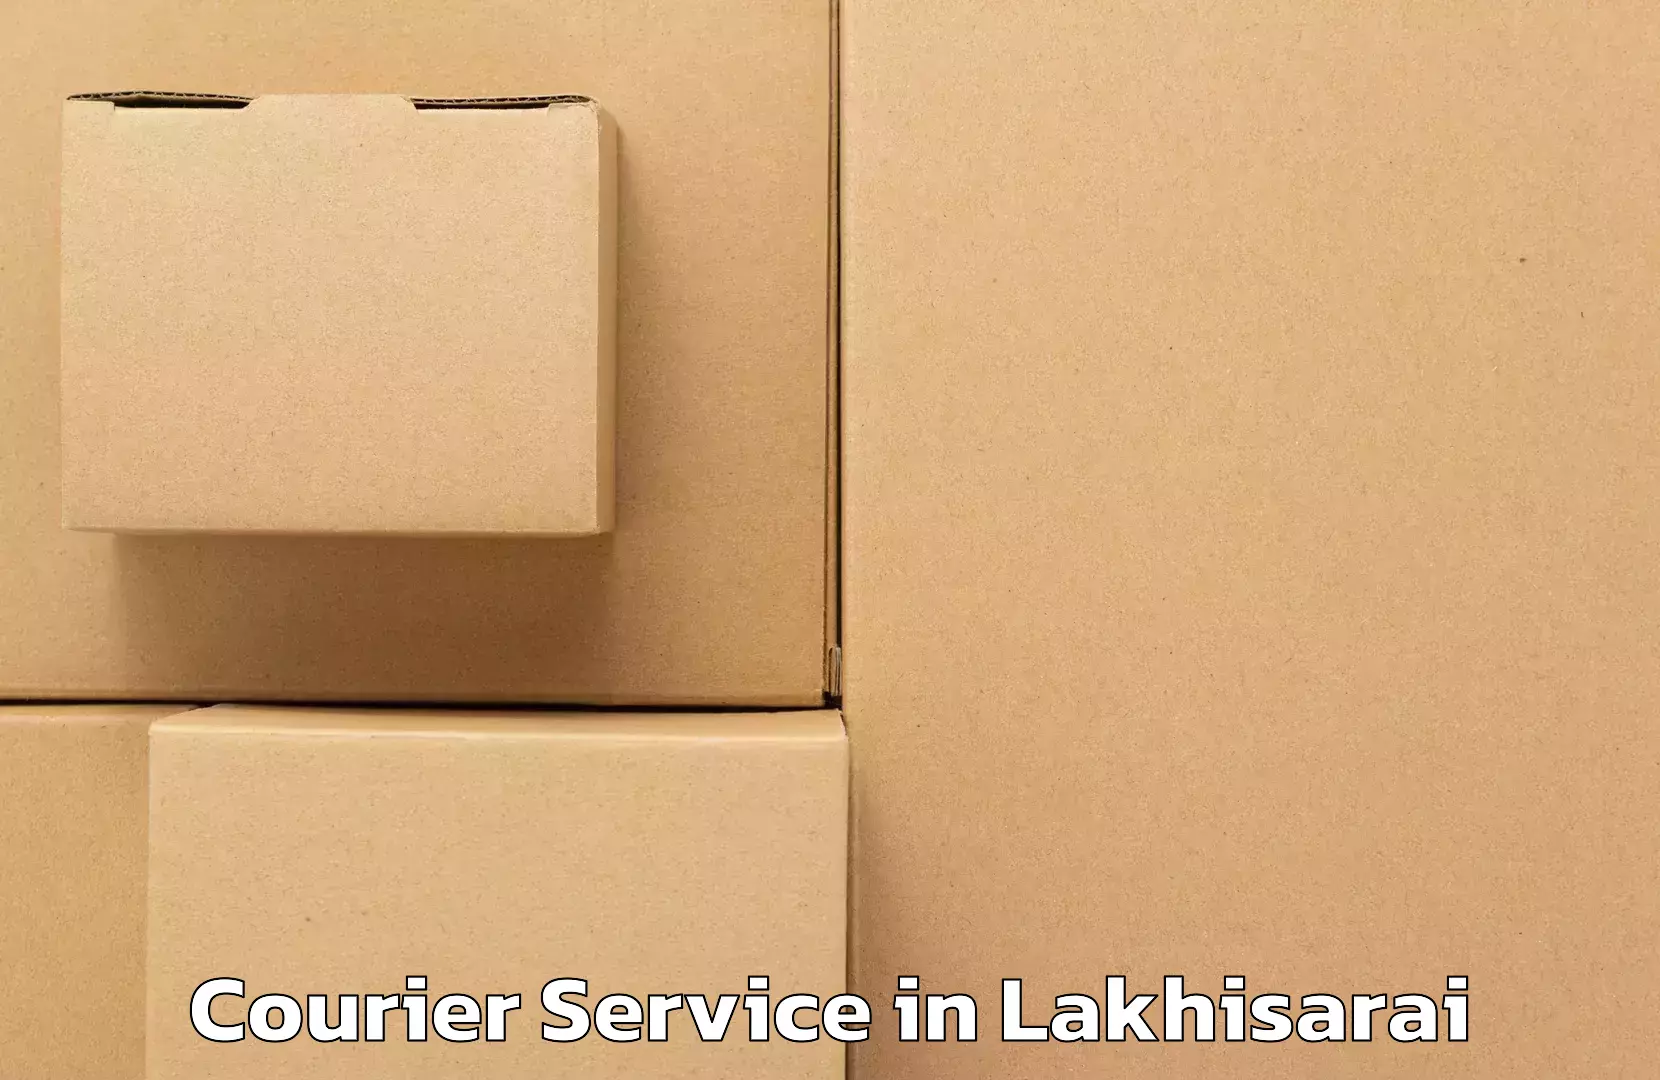 Heavy parcel delivery in Lakhisarai